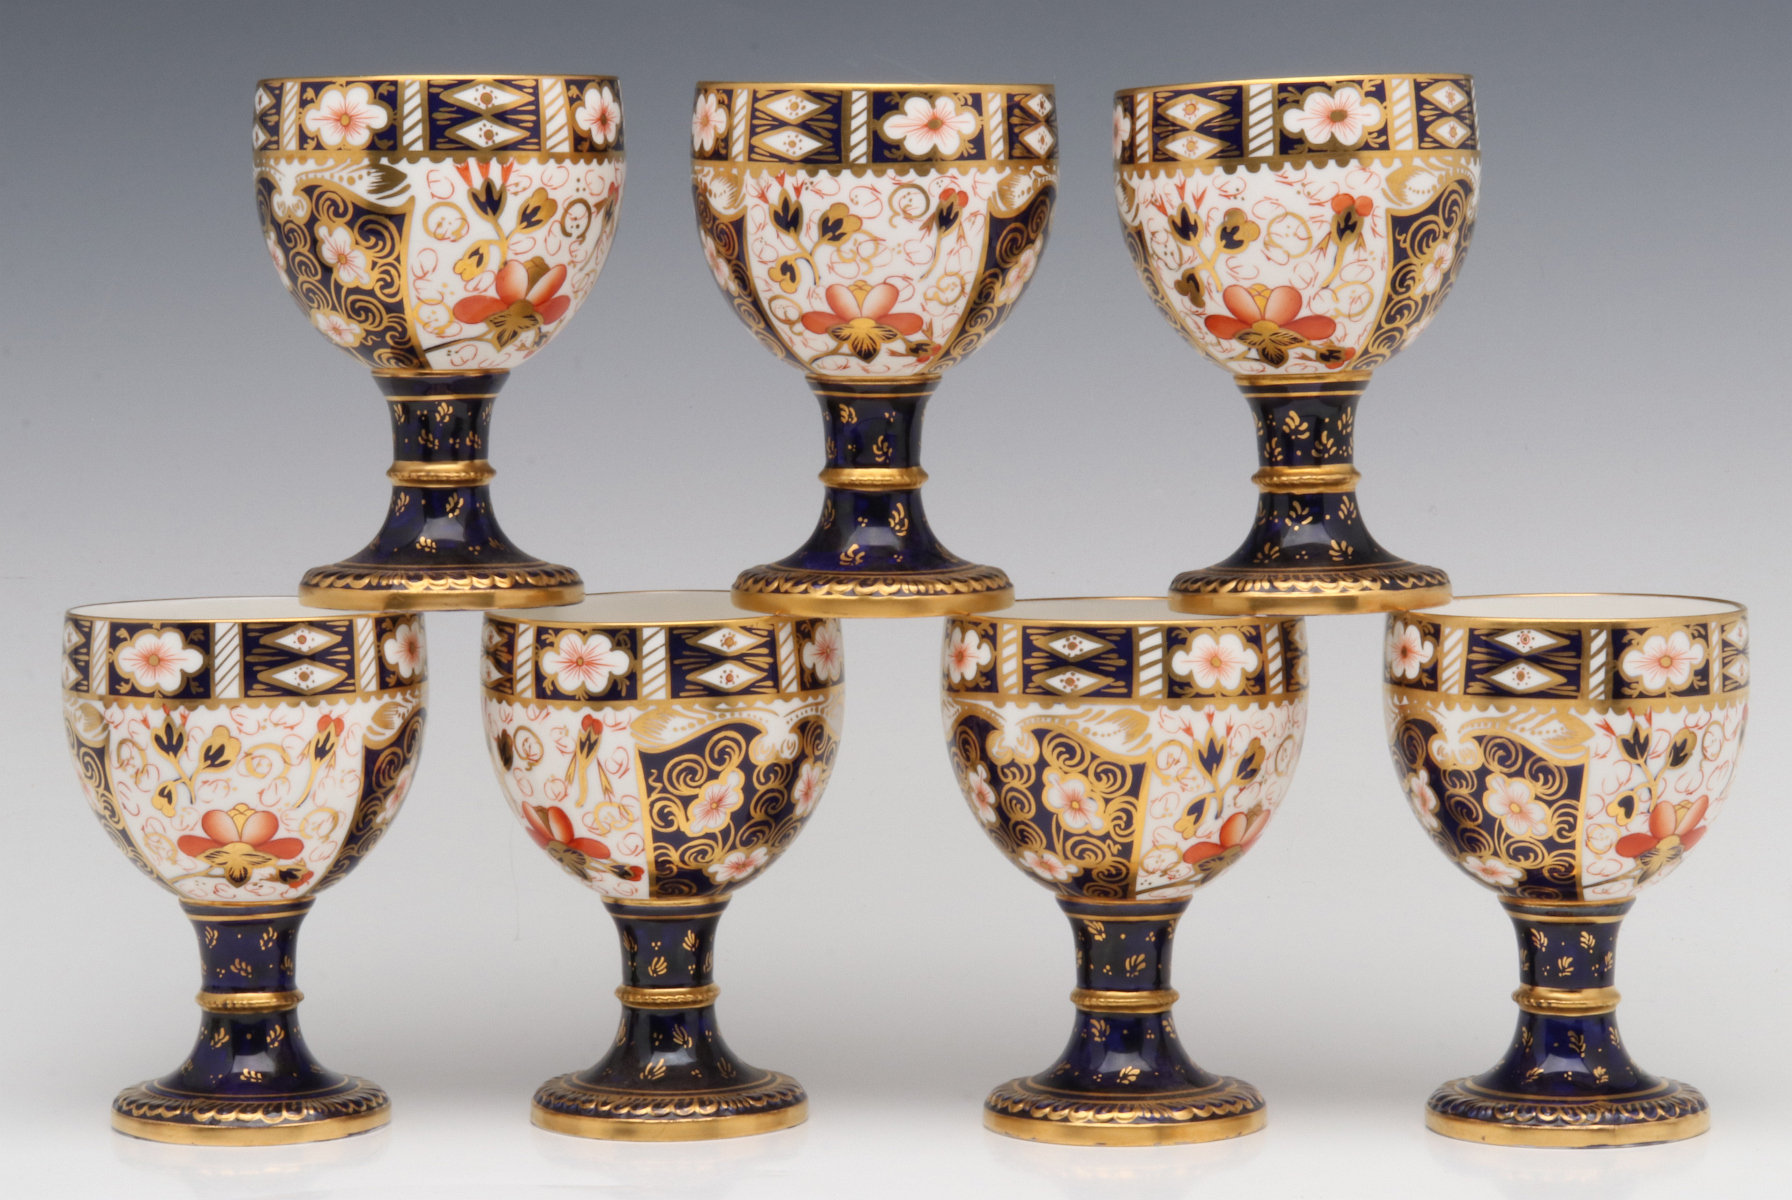 ROYAL CROWN DERBY 'TRADITIONAL IMARI' PATTERN GOBLETS